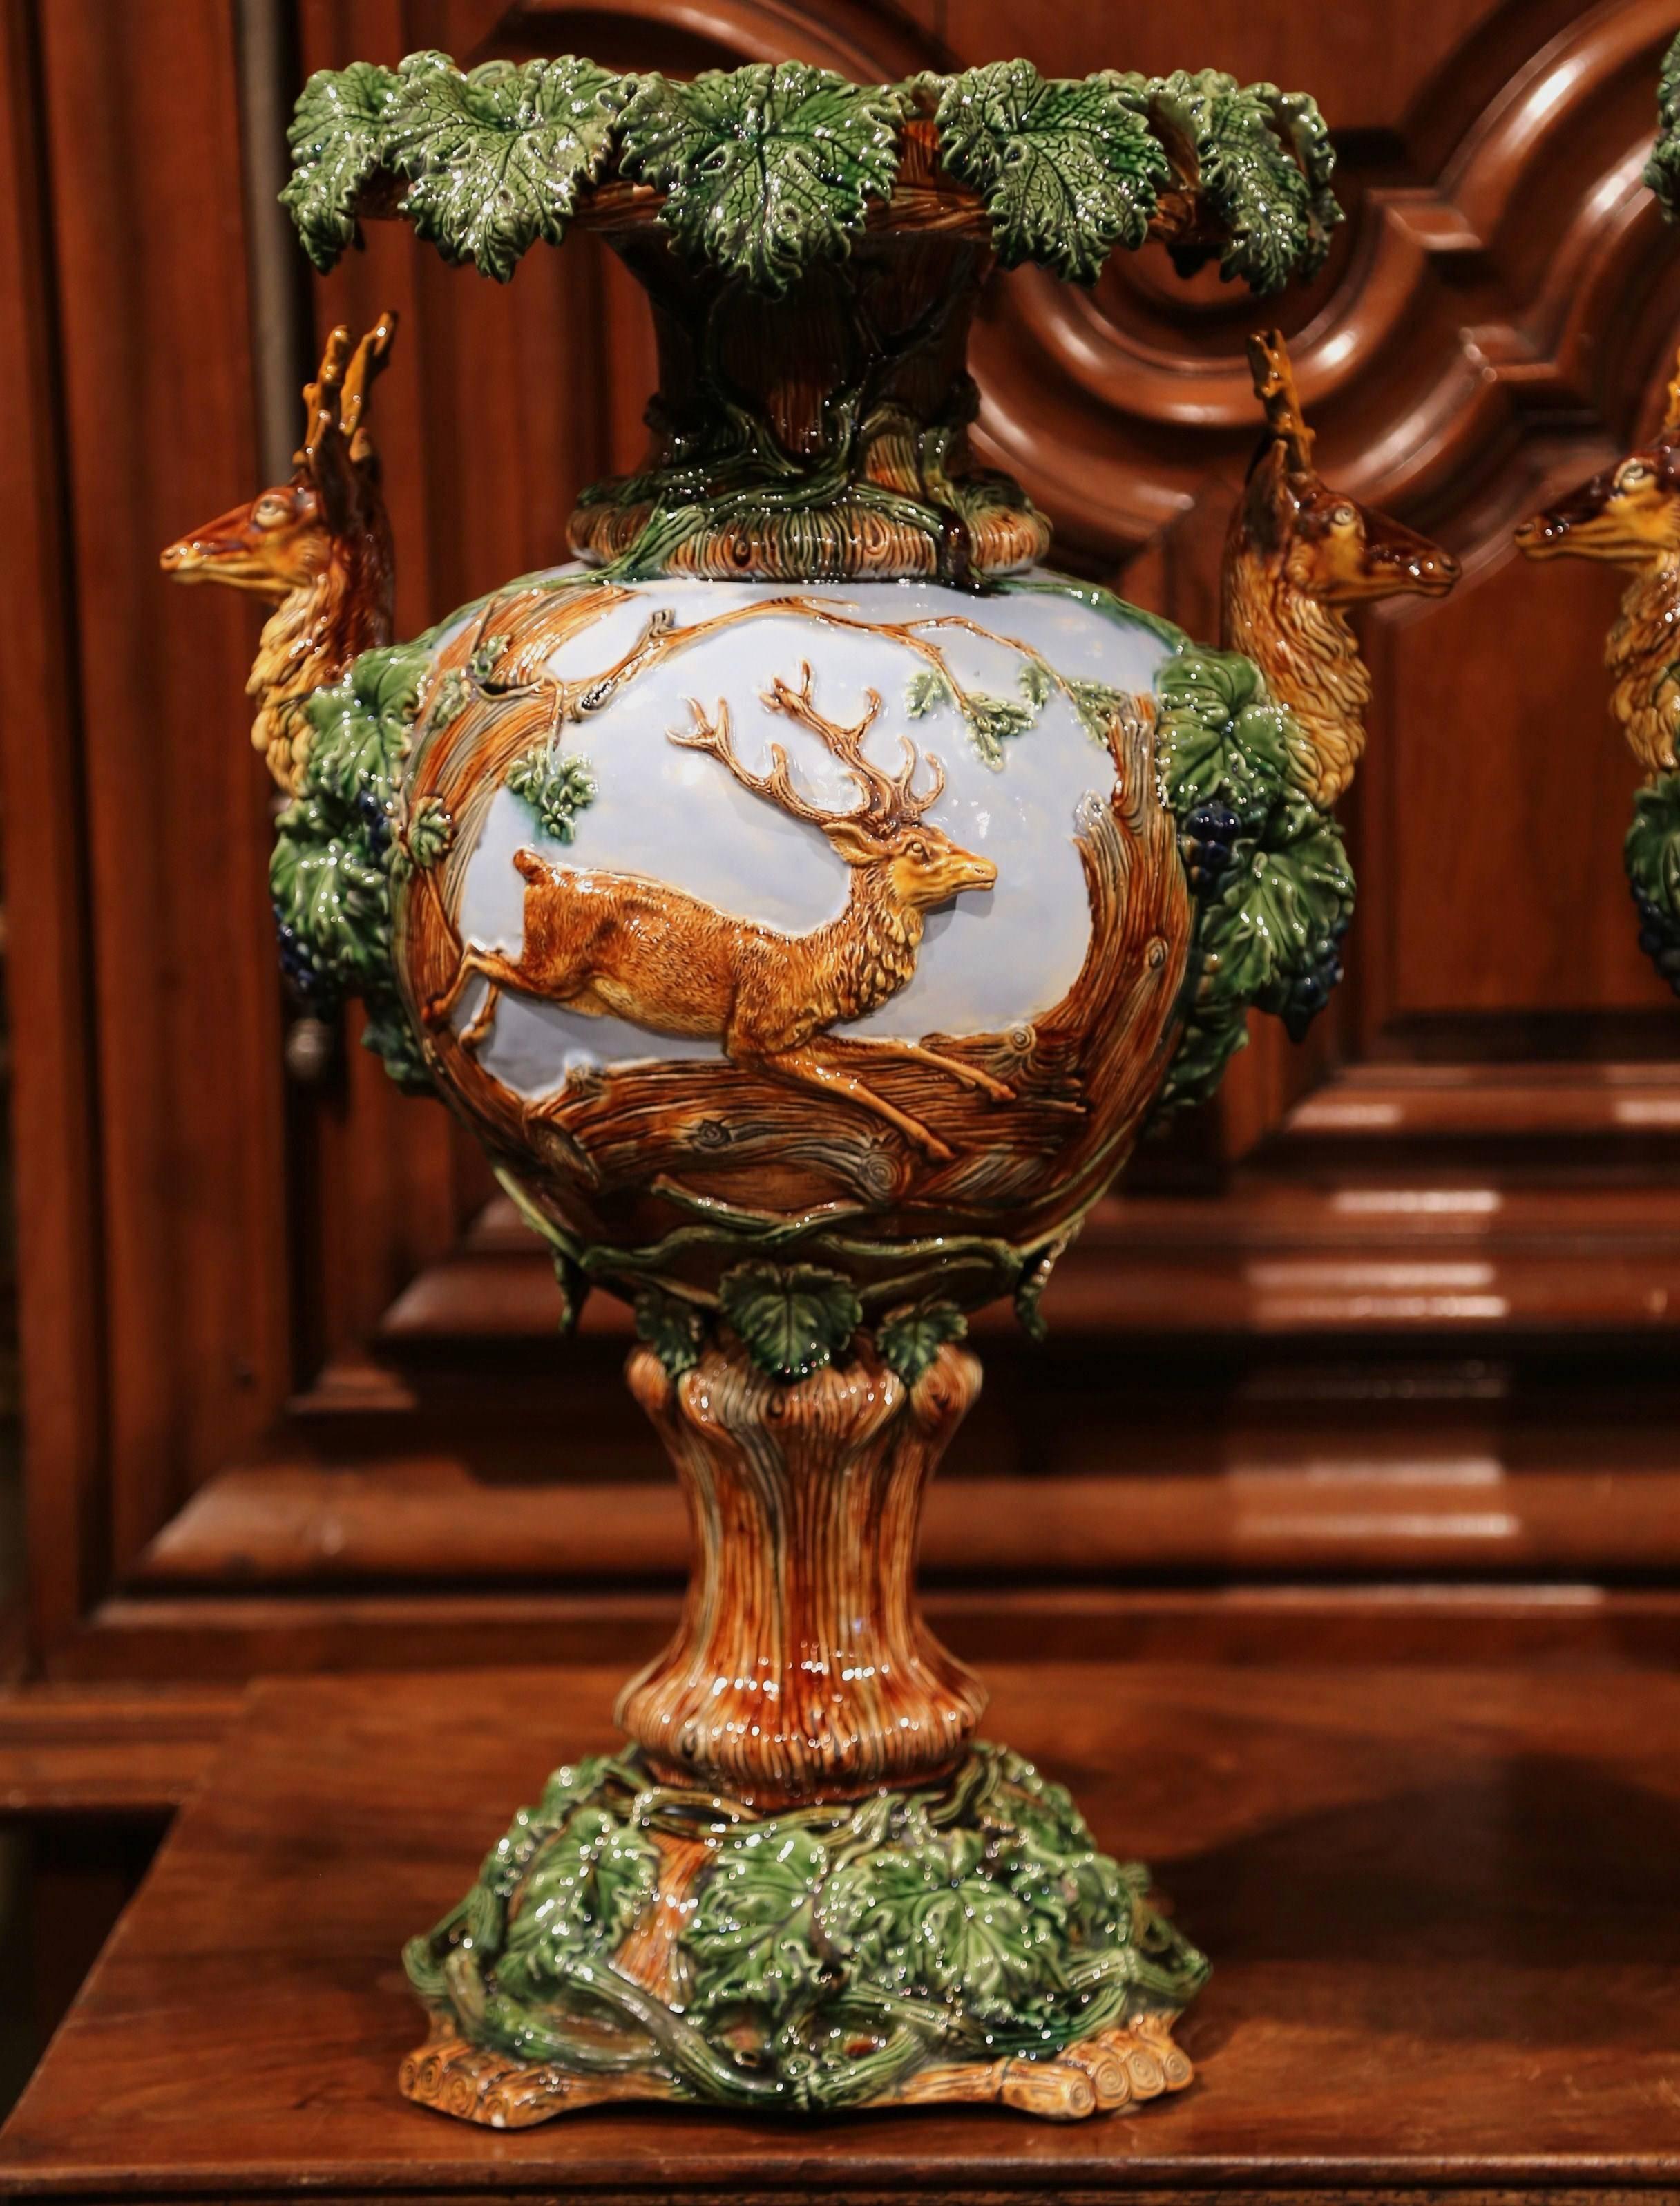 This monumental pair of antique majolica vases was crafted in France, circa 1890. Each of the colorful vases features low relief stags running on the front with sculptural, high relief deer head trophies with antlers on the sides. The vases are